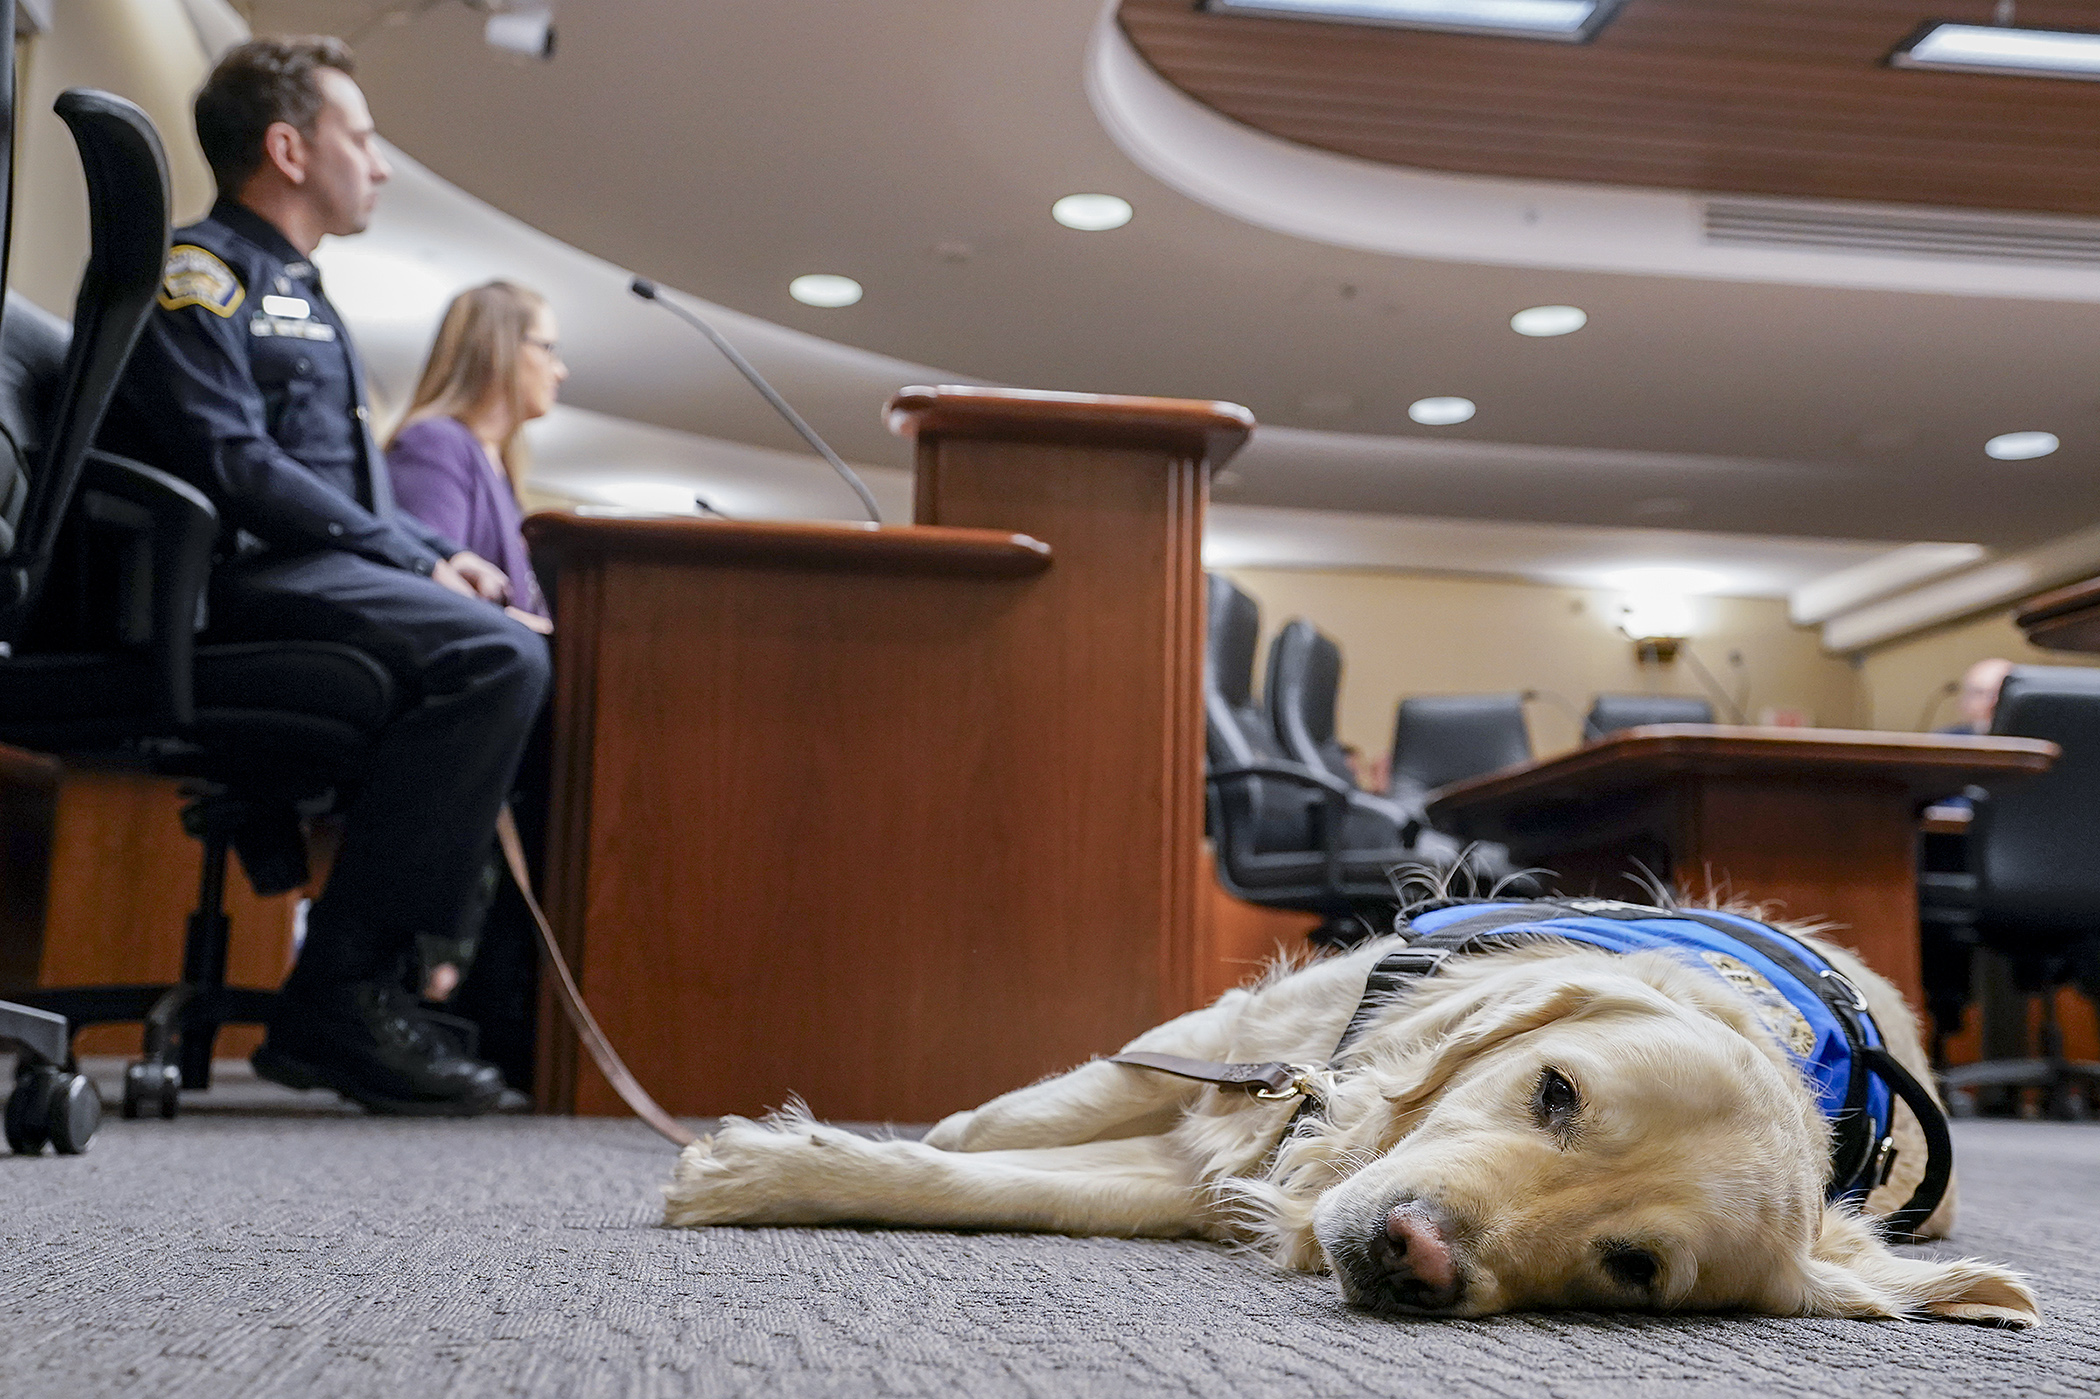 Woodbury Police Detective Adam Sack and Otis, the department's golden retriever therapy dog, accompanied Rep. Patricia Mueller for a hearing on her bill to establish grants to help place therapy dogs in law enforcement agencies. (Photo by Michele Jokinen)